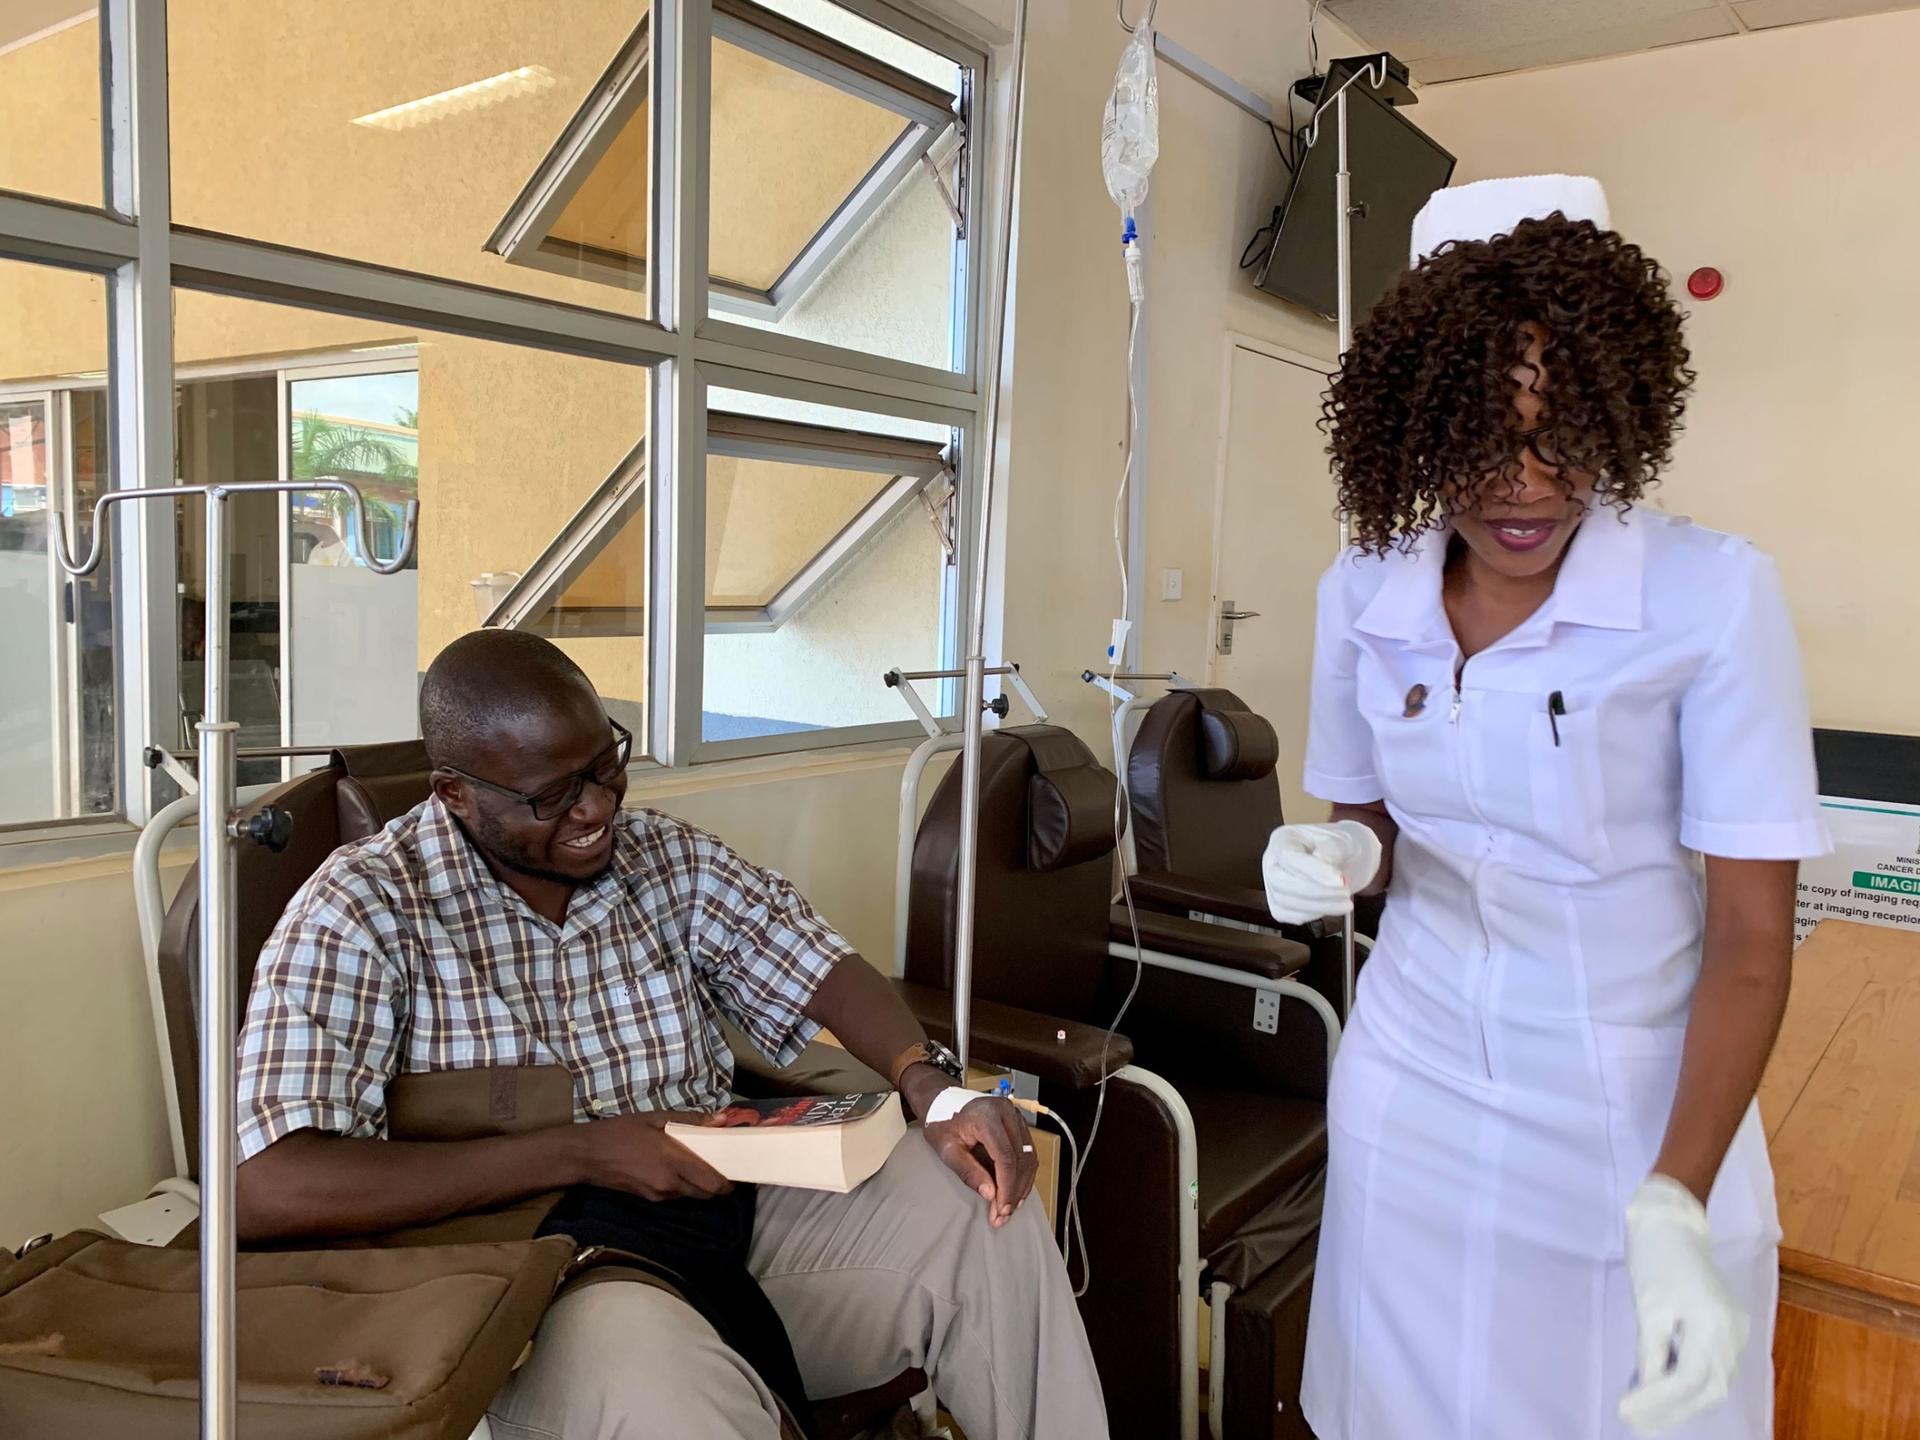 Twice a year, Muchimba Kabeta gets infusions of the medication Rituximab at University of Teaching Hospital in Lusaka, Zambia. He was diagnosed with multiple sclerosis after 10 years of struggling with symptoms.